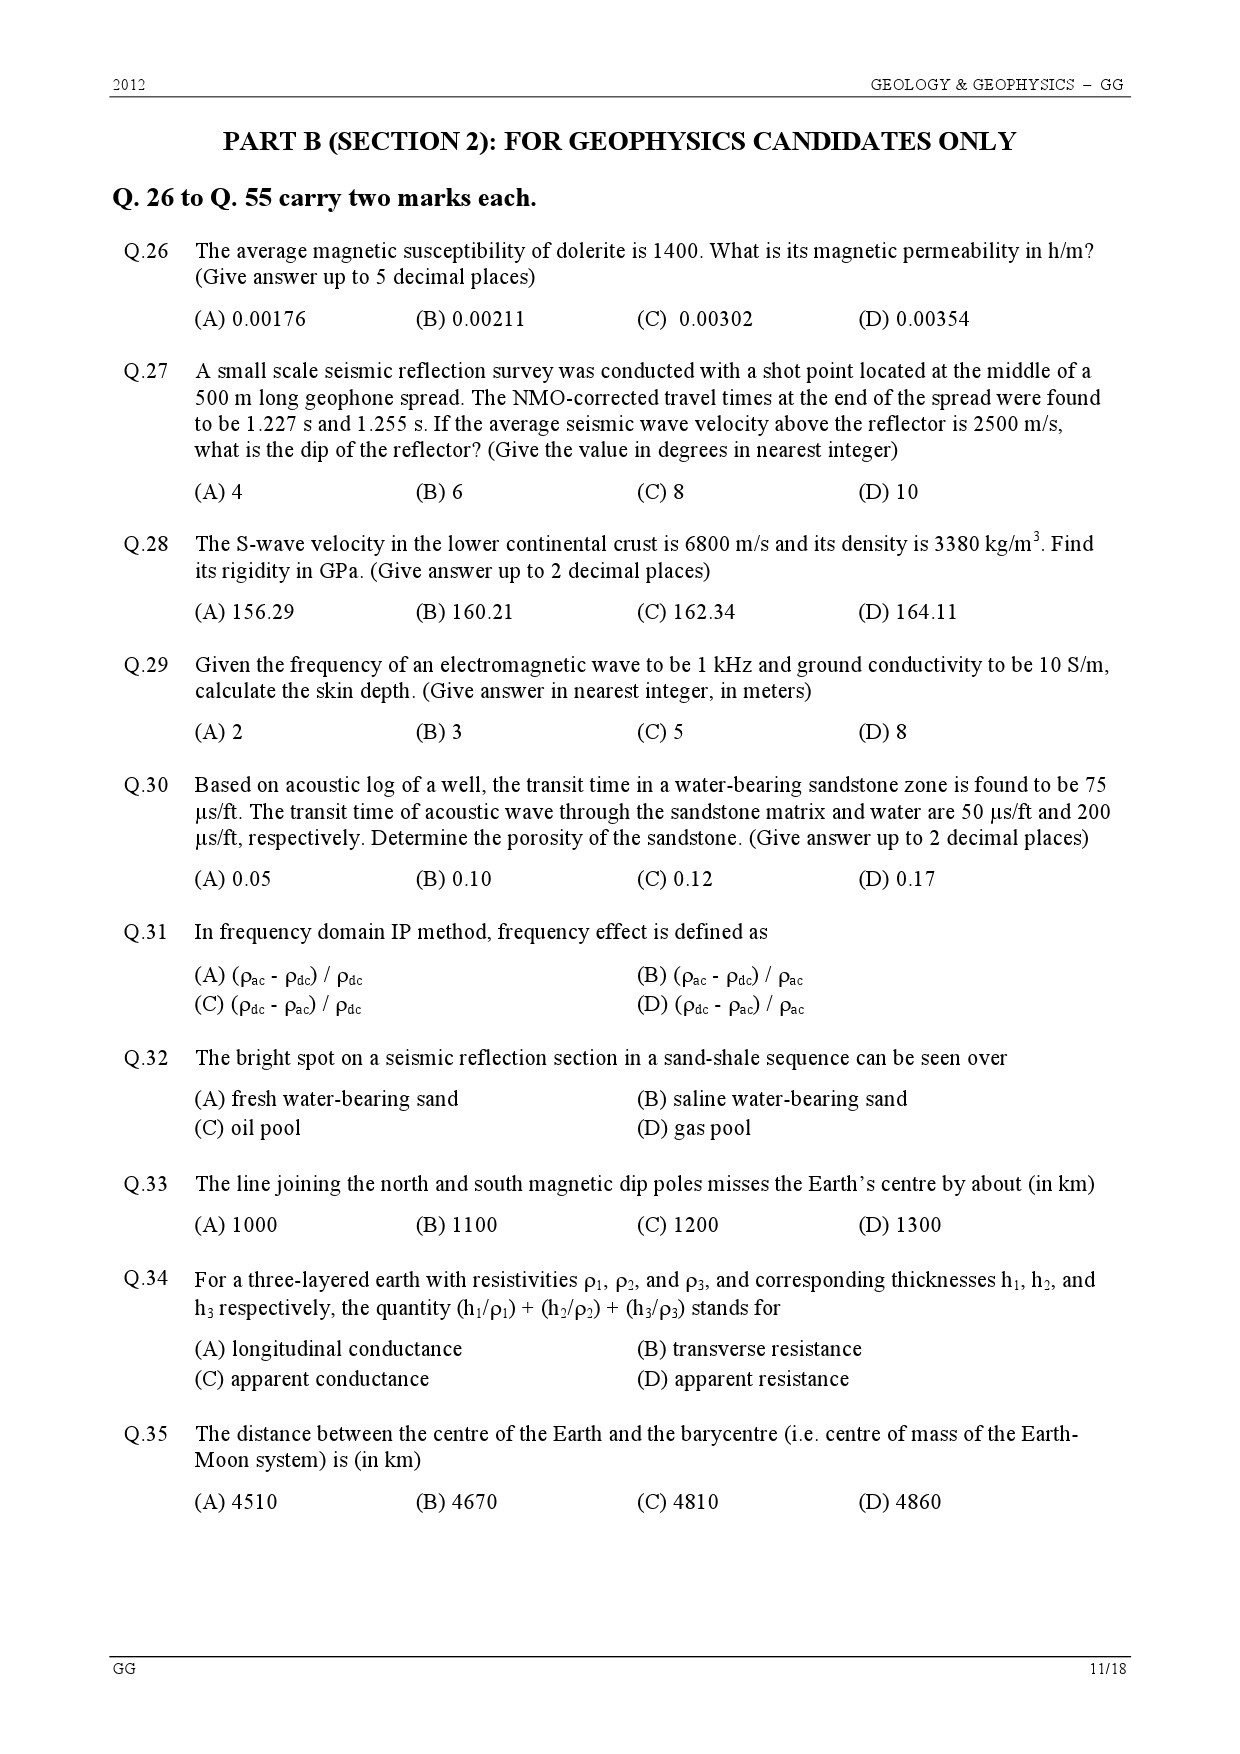 GATE Exam Question Paper 2012 Geology and Geophysics 11